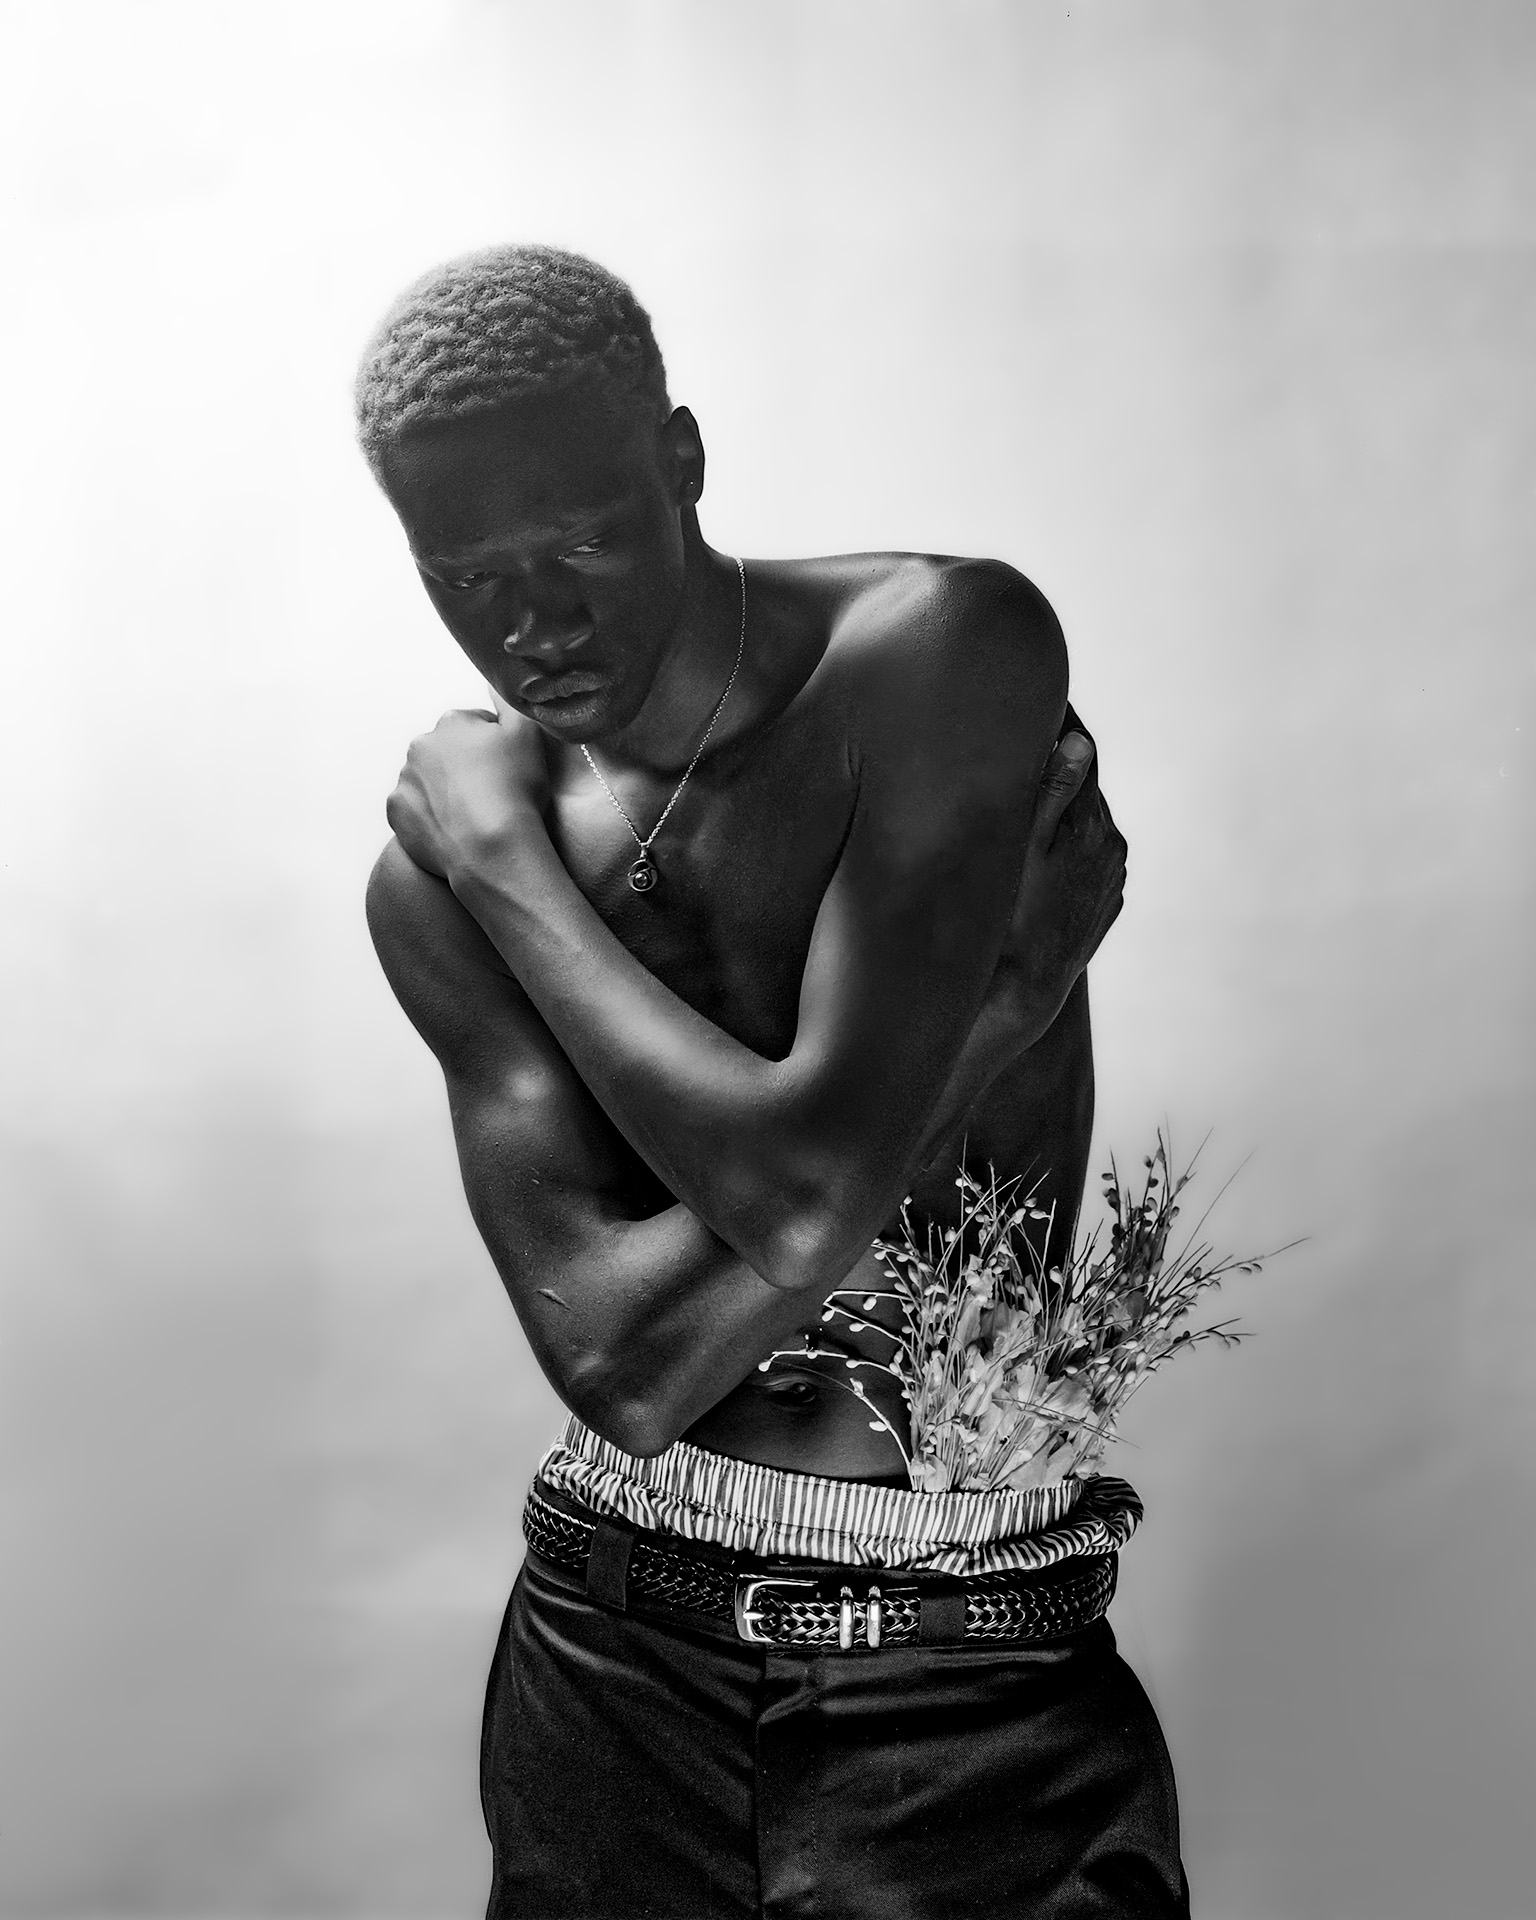 Flowers at the Door: Rukundo, a Black man with buzzed blonde hair, stands shirtless, with plants tucked into the waistband of his black pants. He is looking down, slightly hunched over while his hands are tucked on either side of his pants. He stands in front of a light-coloured background.